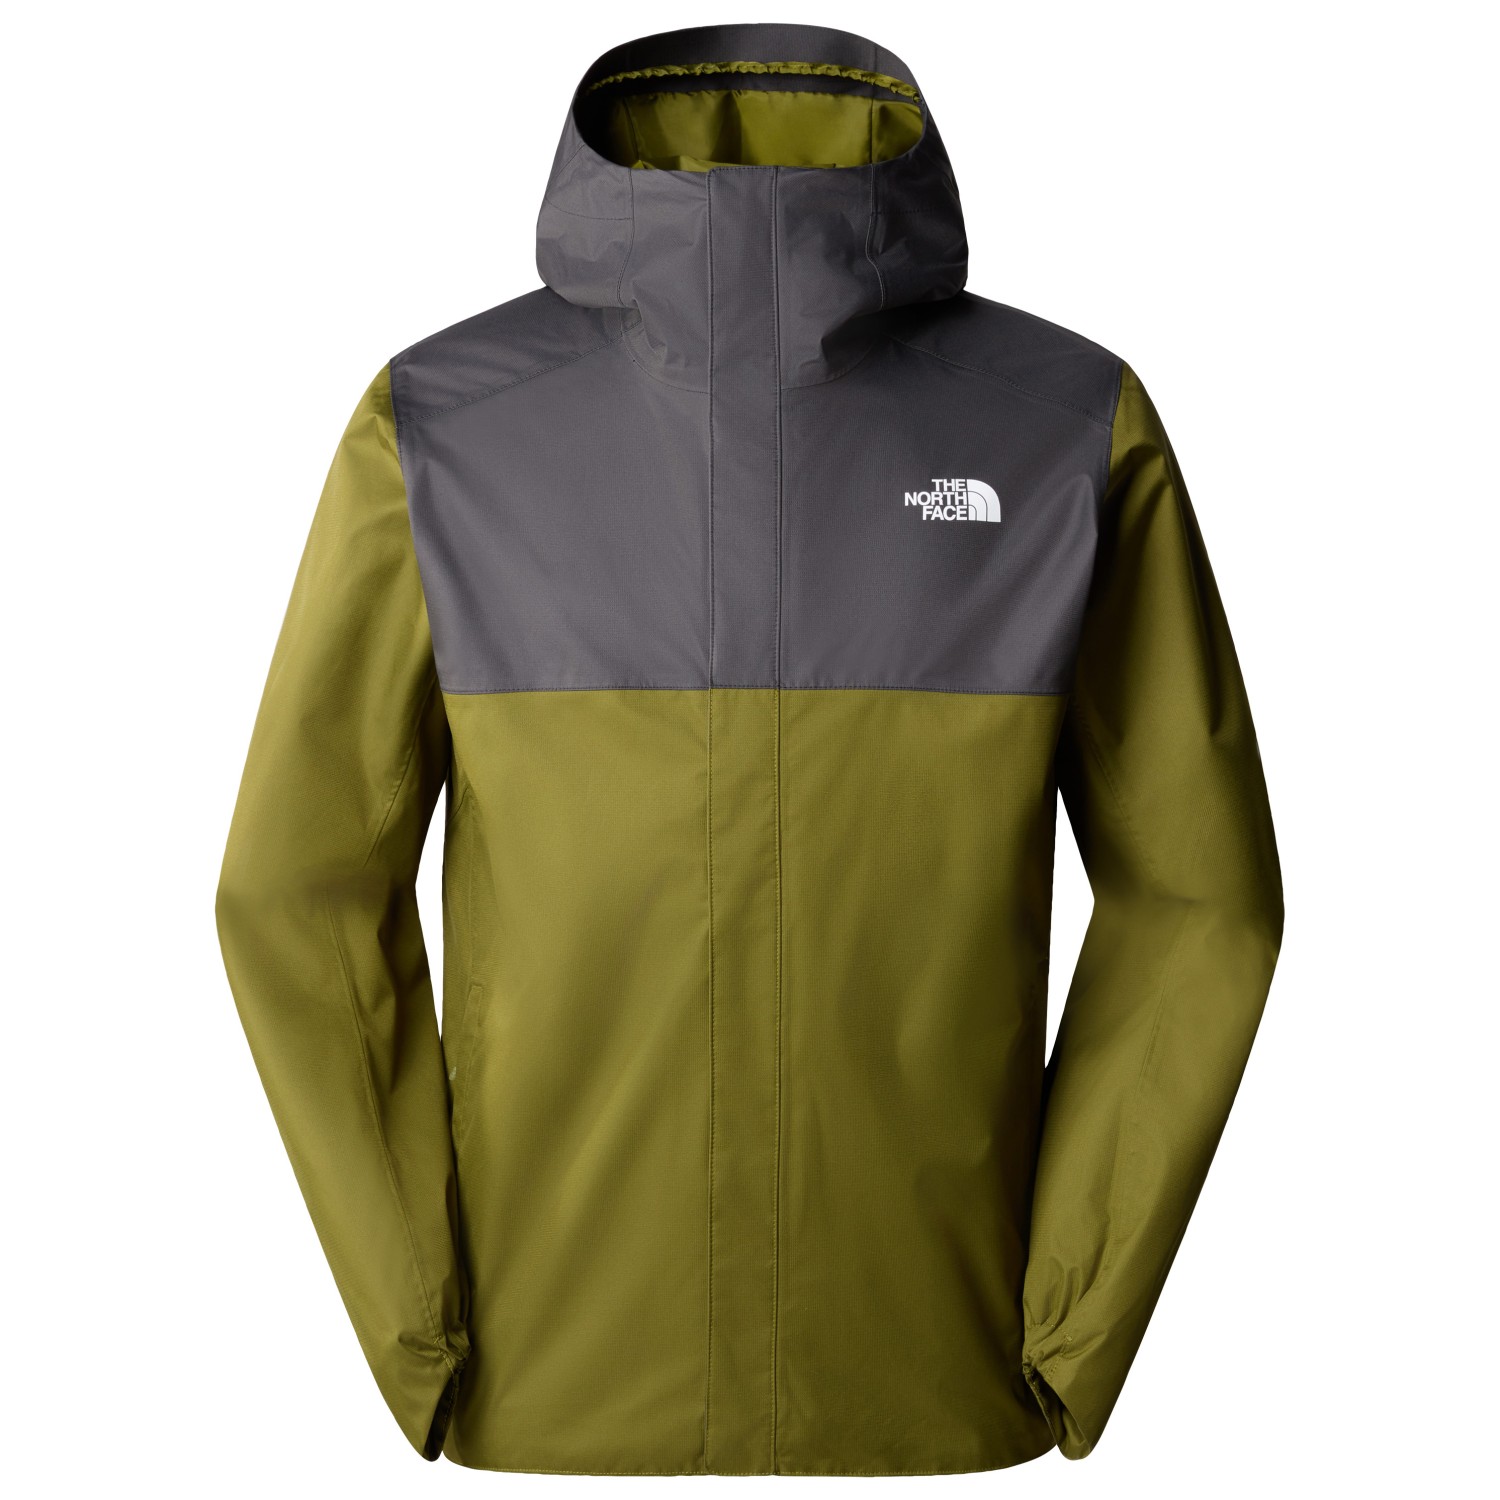 Дождевик The North Face Quest Zip In, цвет Forest Olive/Asphalt Grey куртка the north face cropped quest черный